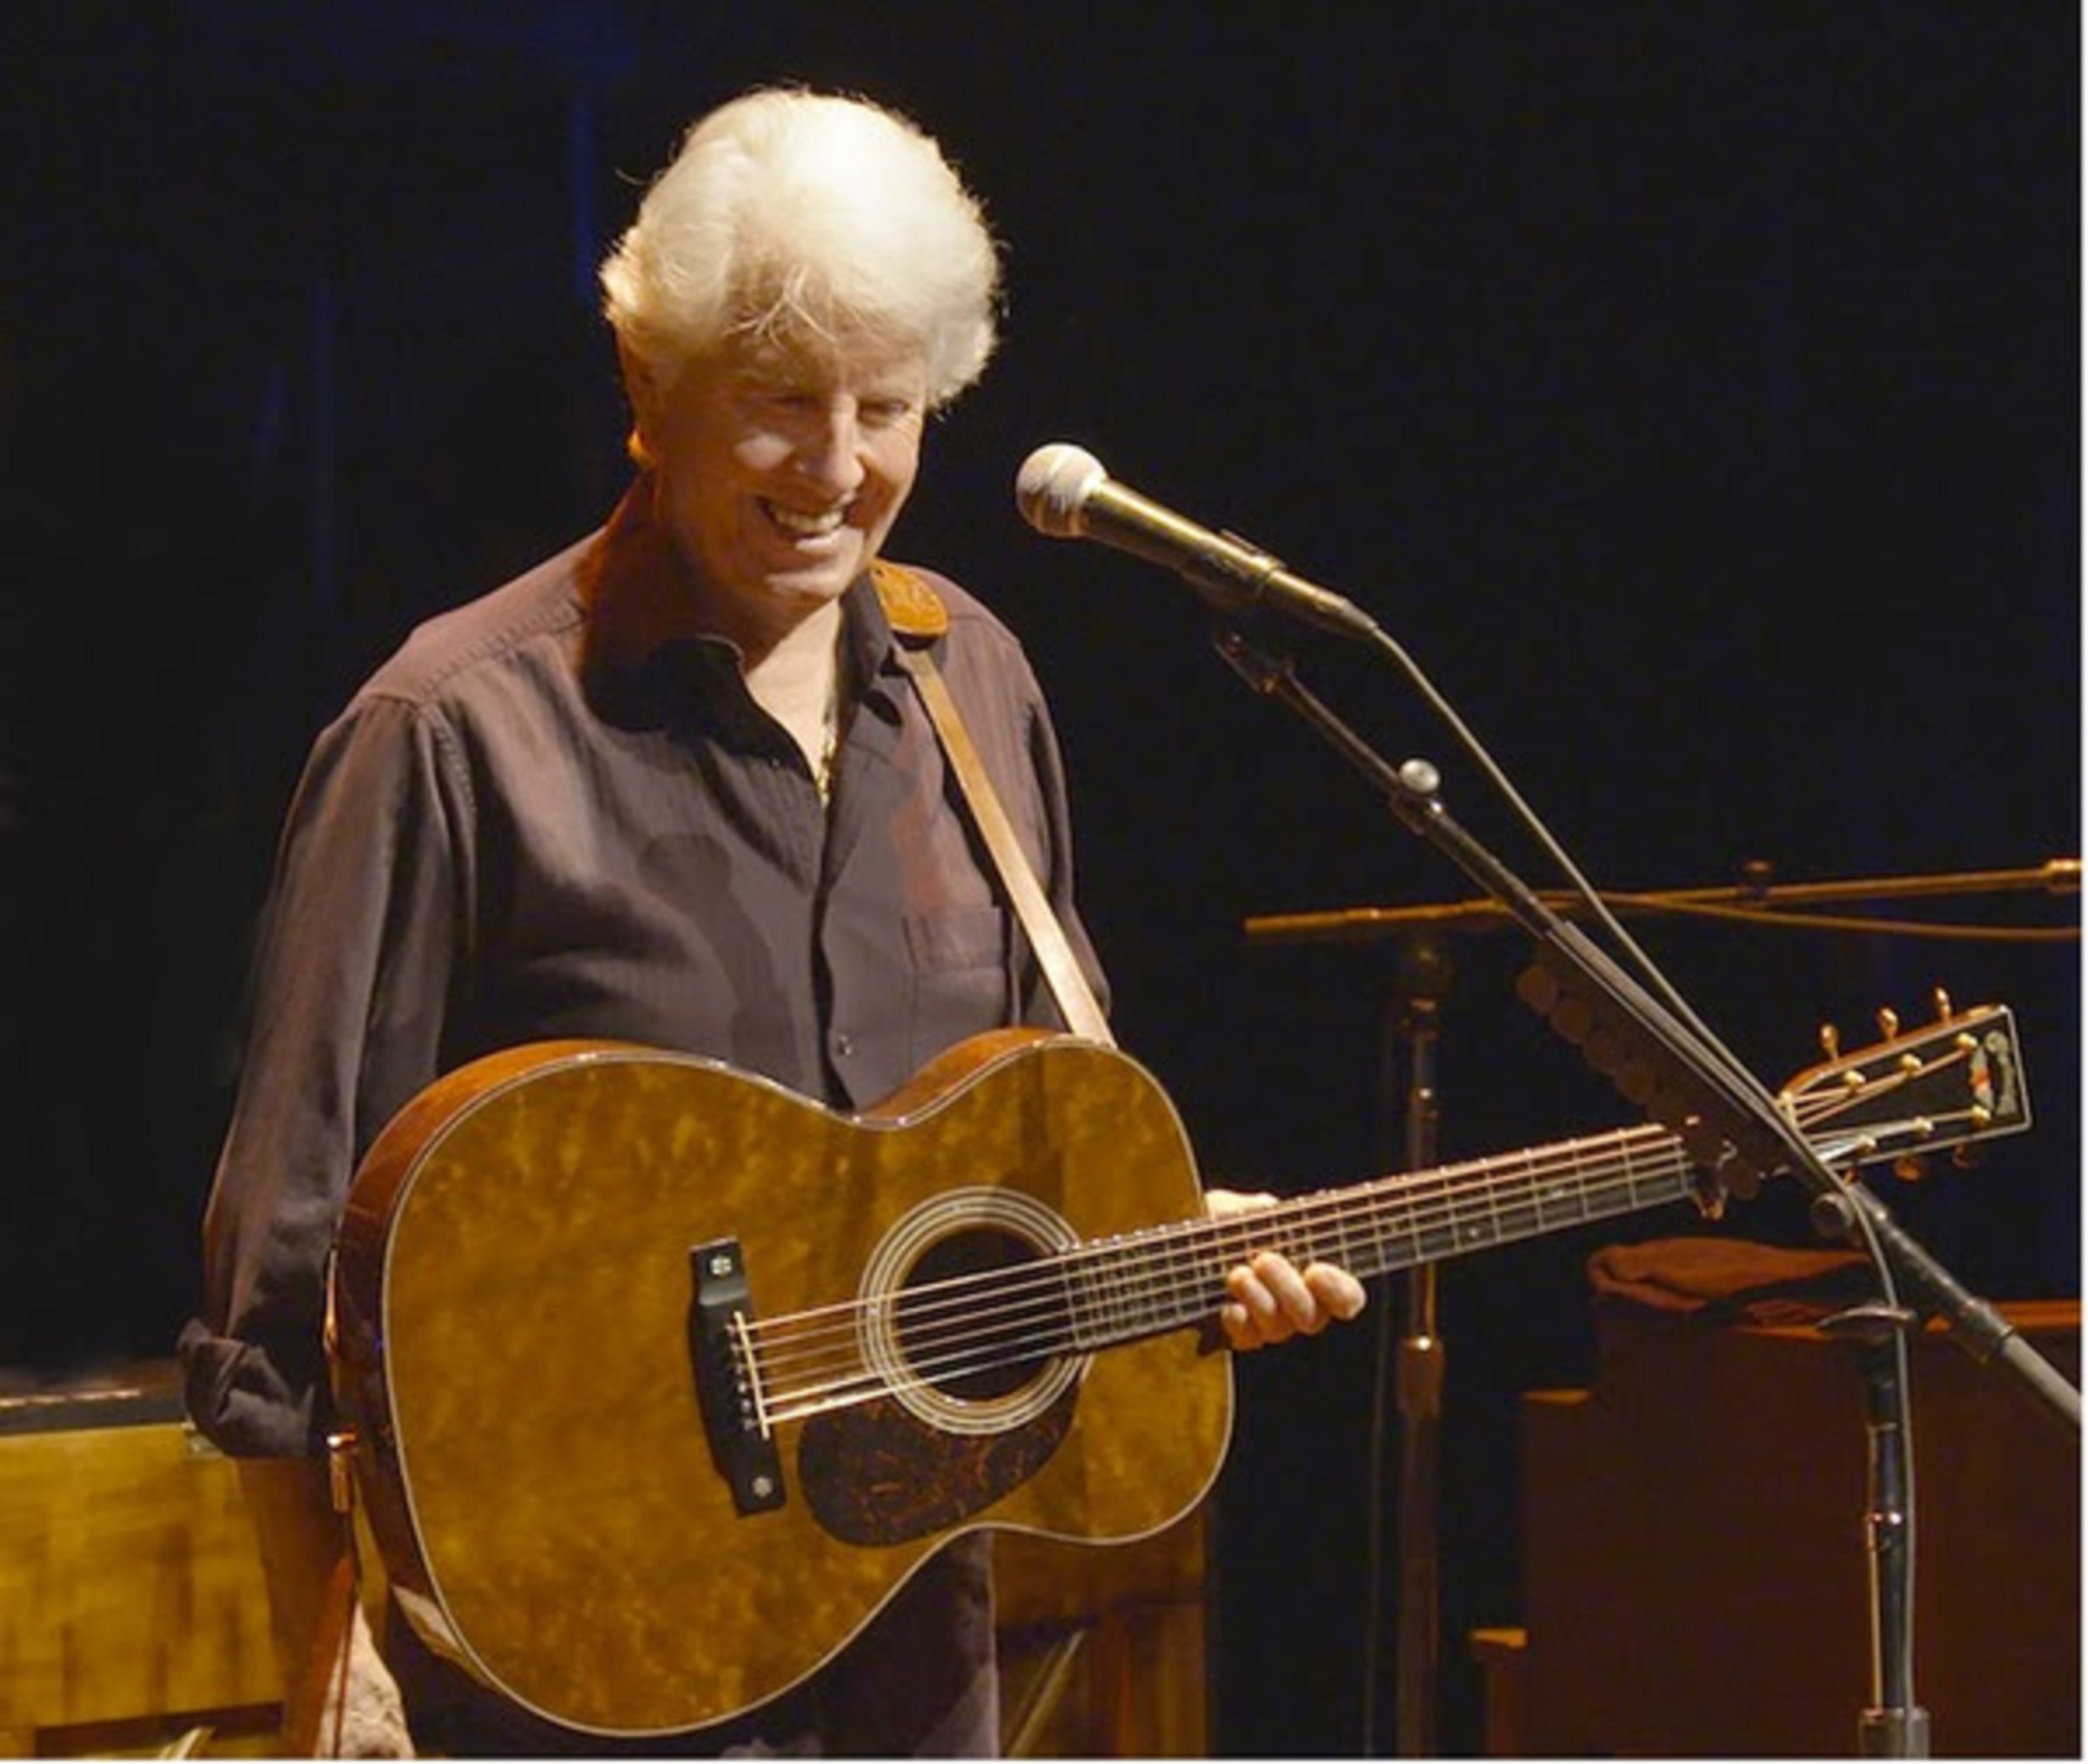 "Graham Nash: Live" out today on Proper Records, features live performances of Nash's seminal solo records "Songs For Beginners" and "Wild Tales"